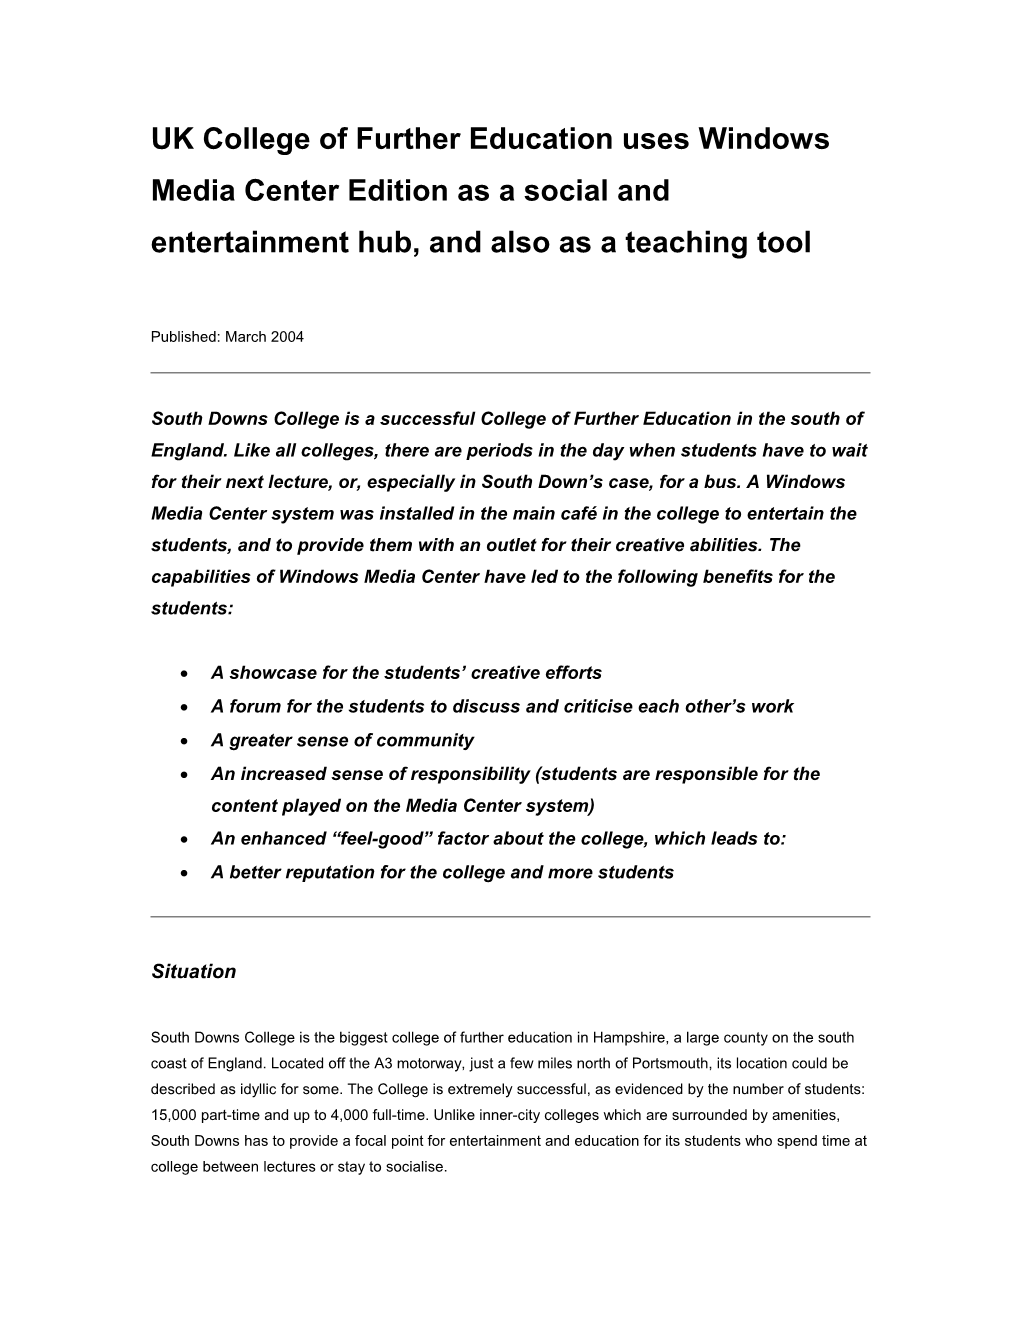 UK College of Further Education Uses Windows Media Centre Edition As a Social and Entertainment